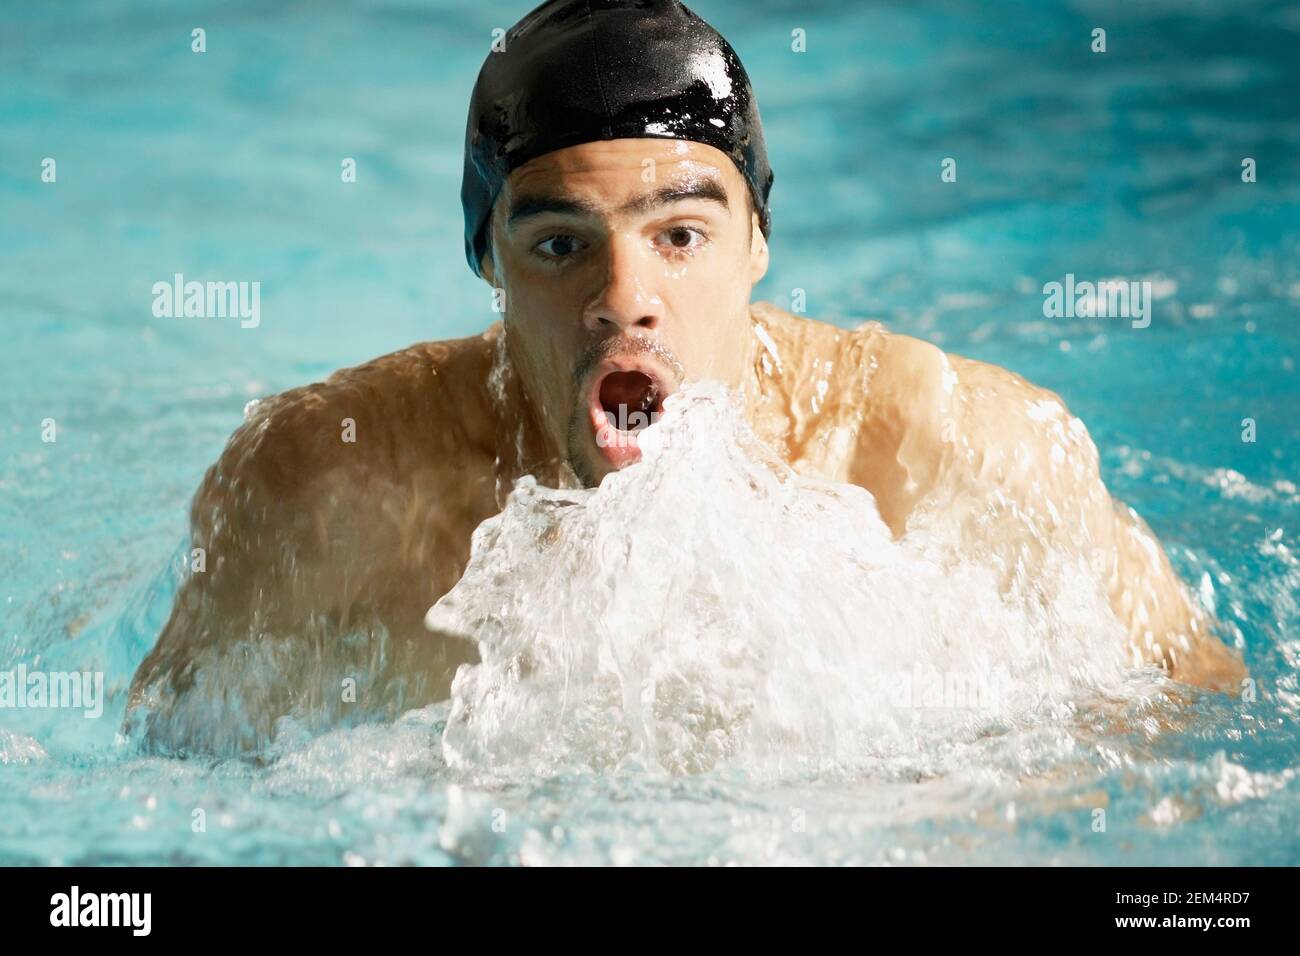 Portrait of a young man swimming in a swimming pool Stock Photo